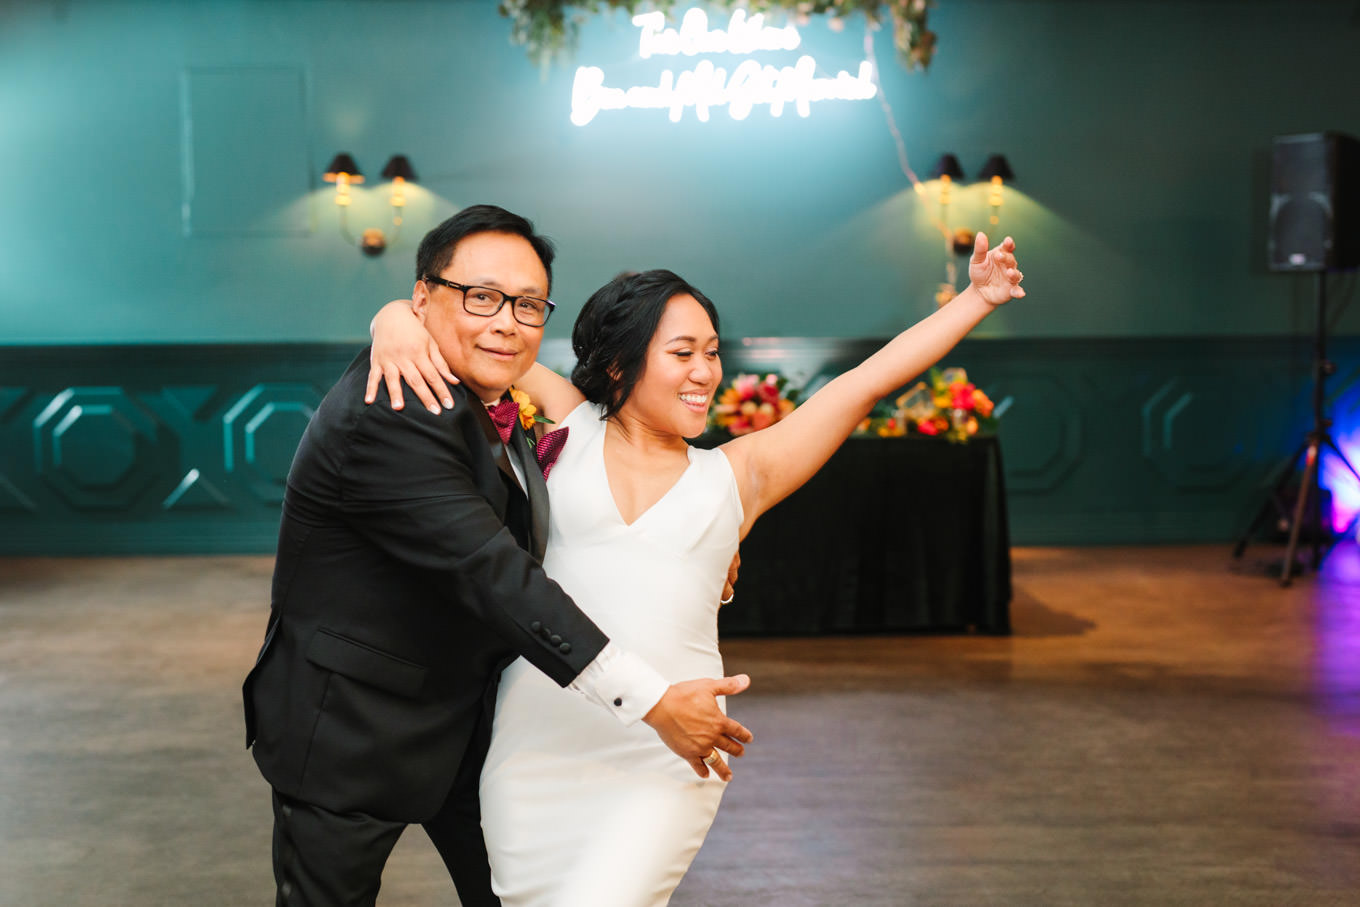 Bride and dad dancing at wedding | TV inspired wedding at The Fig House Los Angeles | Published on The Knot | Fresh and colorful photography for fun-loving couples in Southern California | #losangeleswedding #TVwedding #colorfulwedding #theknot   Source: Mary Costa Photography | Los Angeles wedding photographer